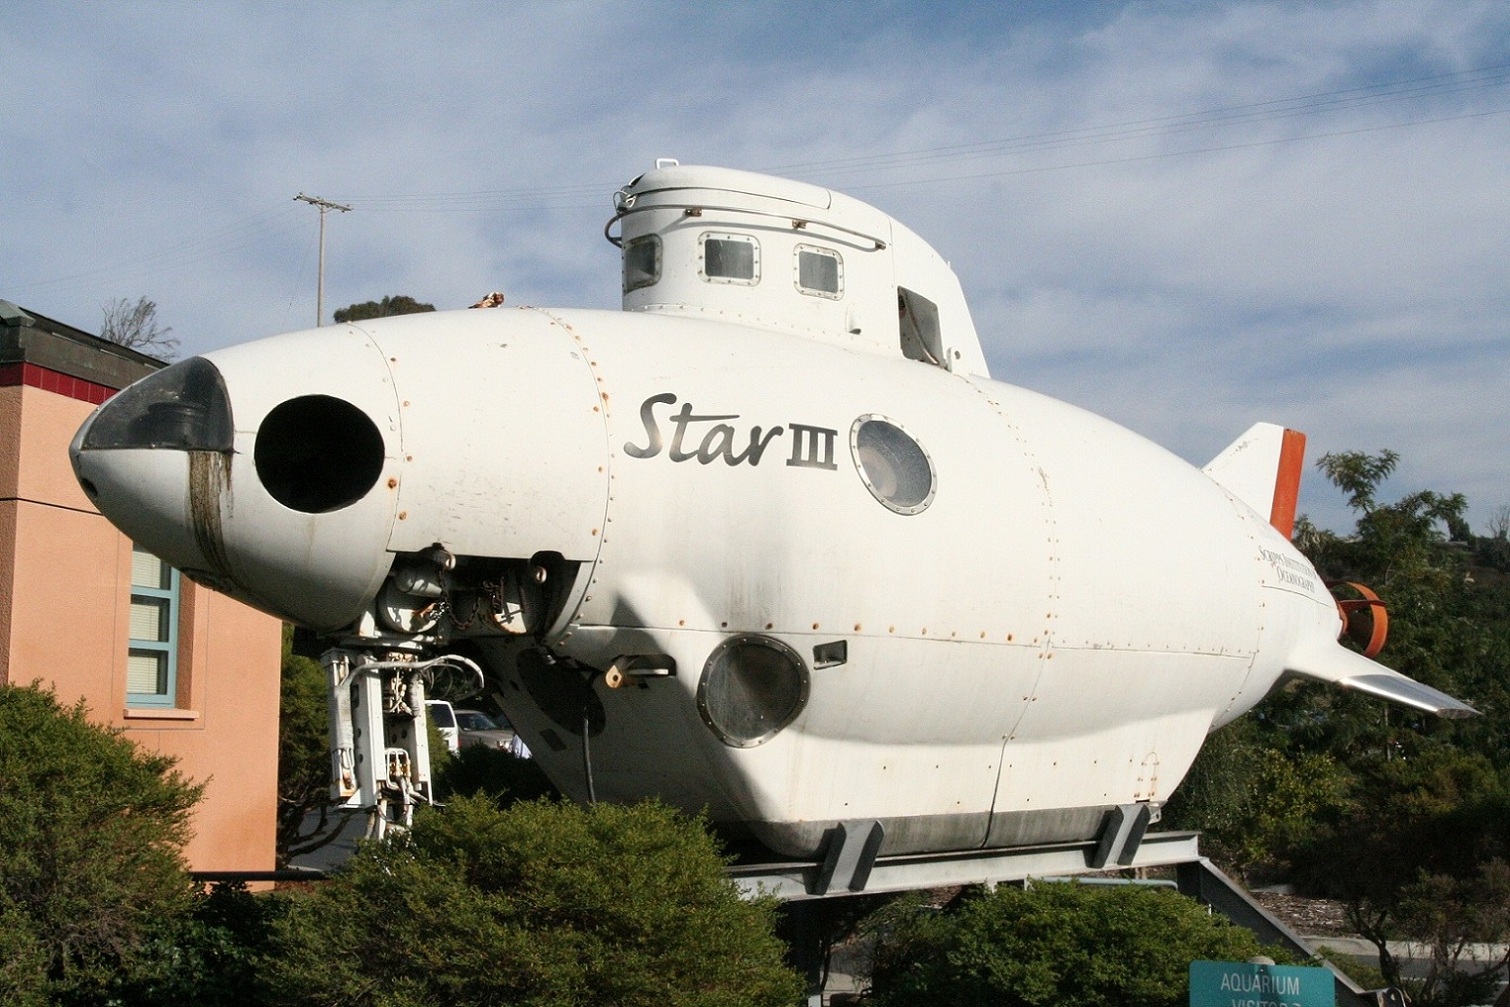 Submersible_named_Star_III_in_front_of_Scripps_Institution_of_Oceanography - копия.jpg